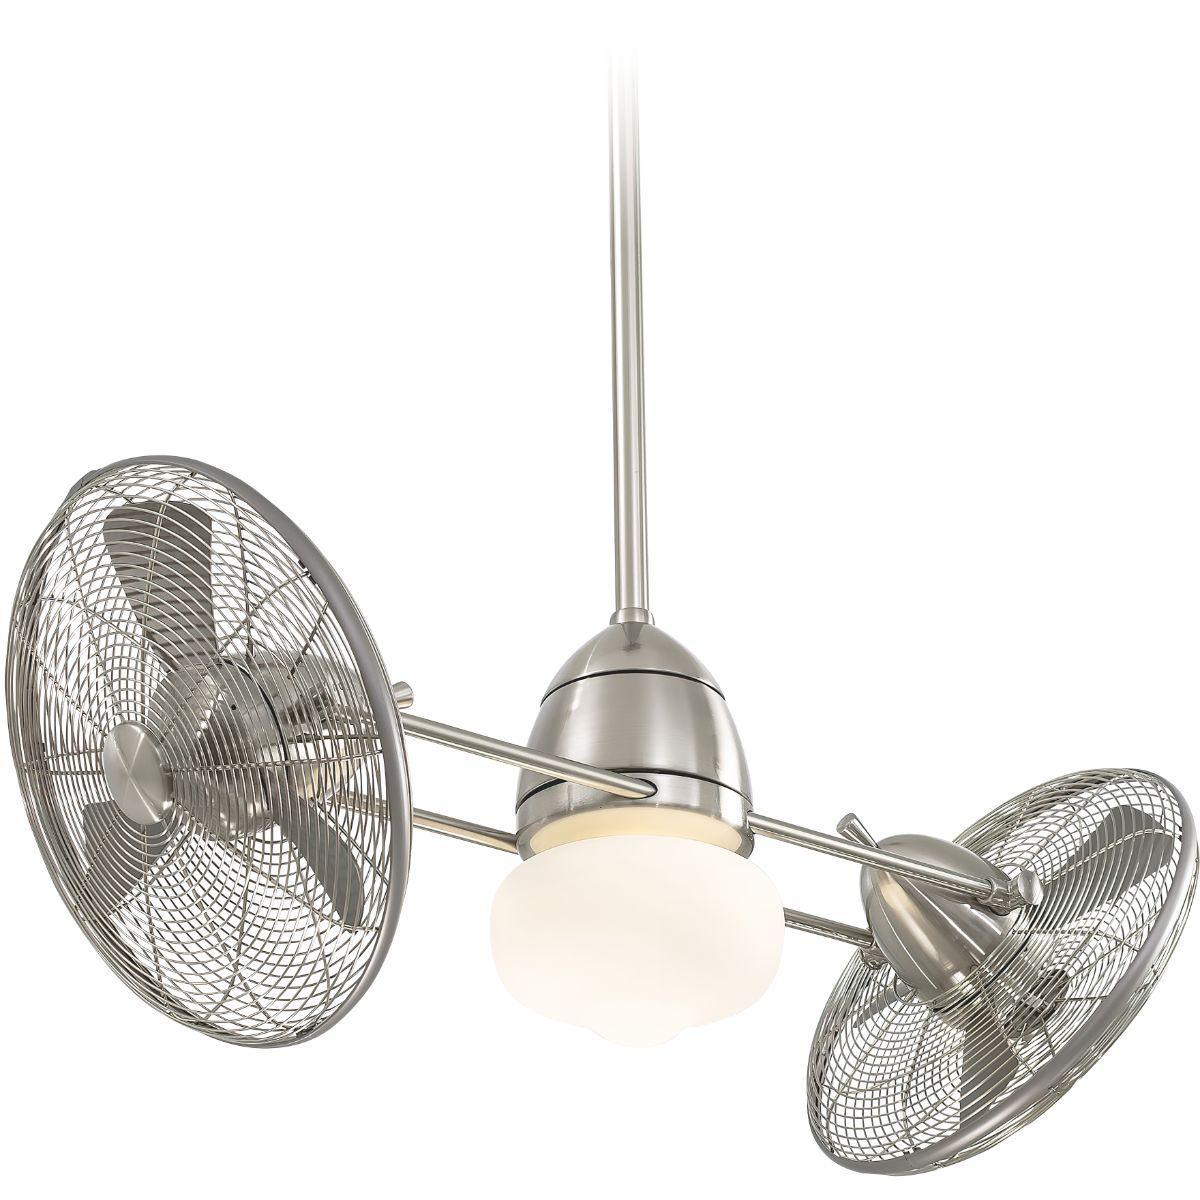 Gyro 42 Inch Contemporary Dual Outdoor Ceiling Fan With Light, Wall Control Included